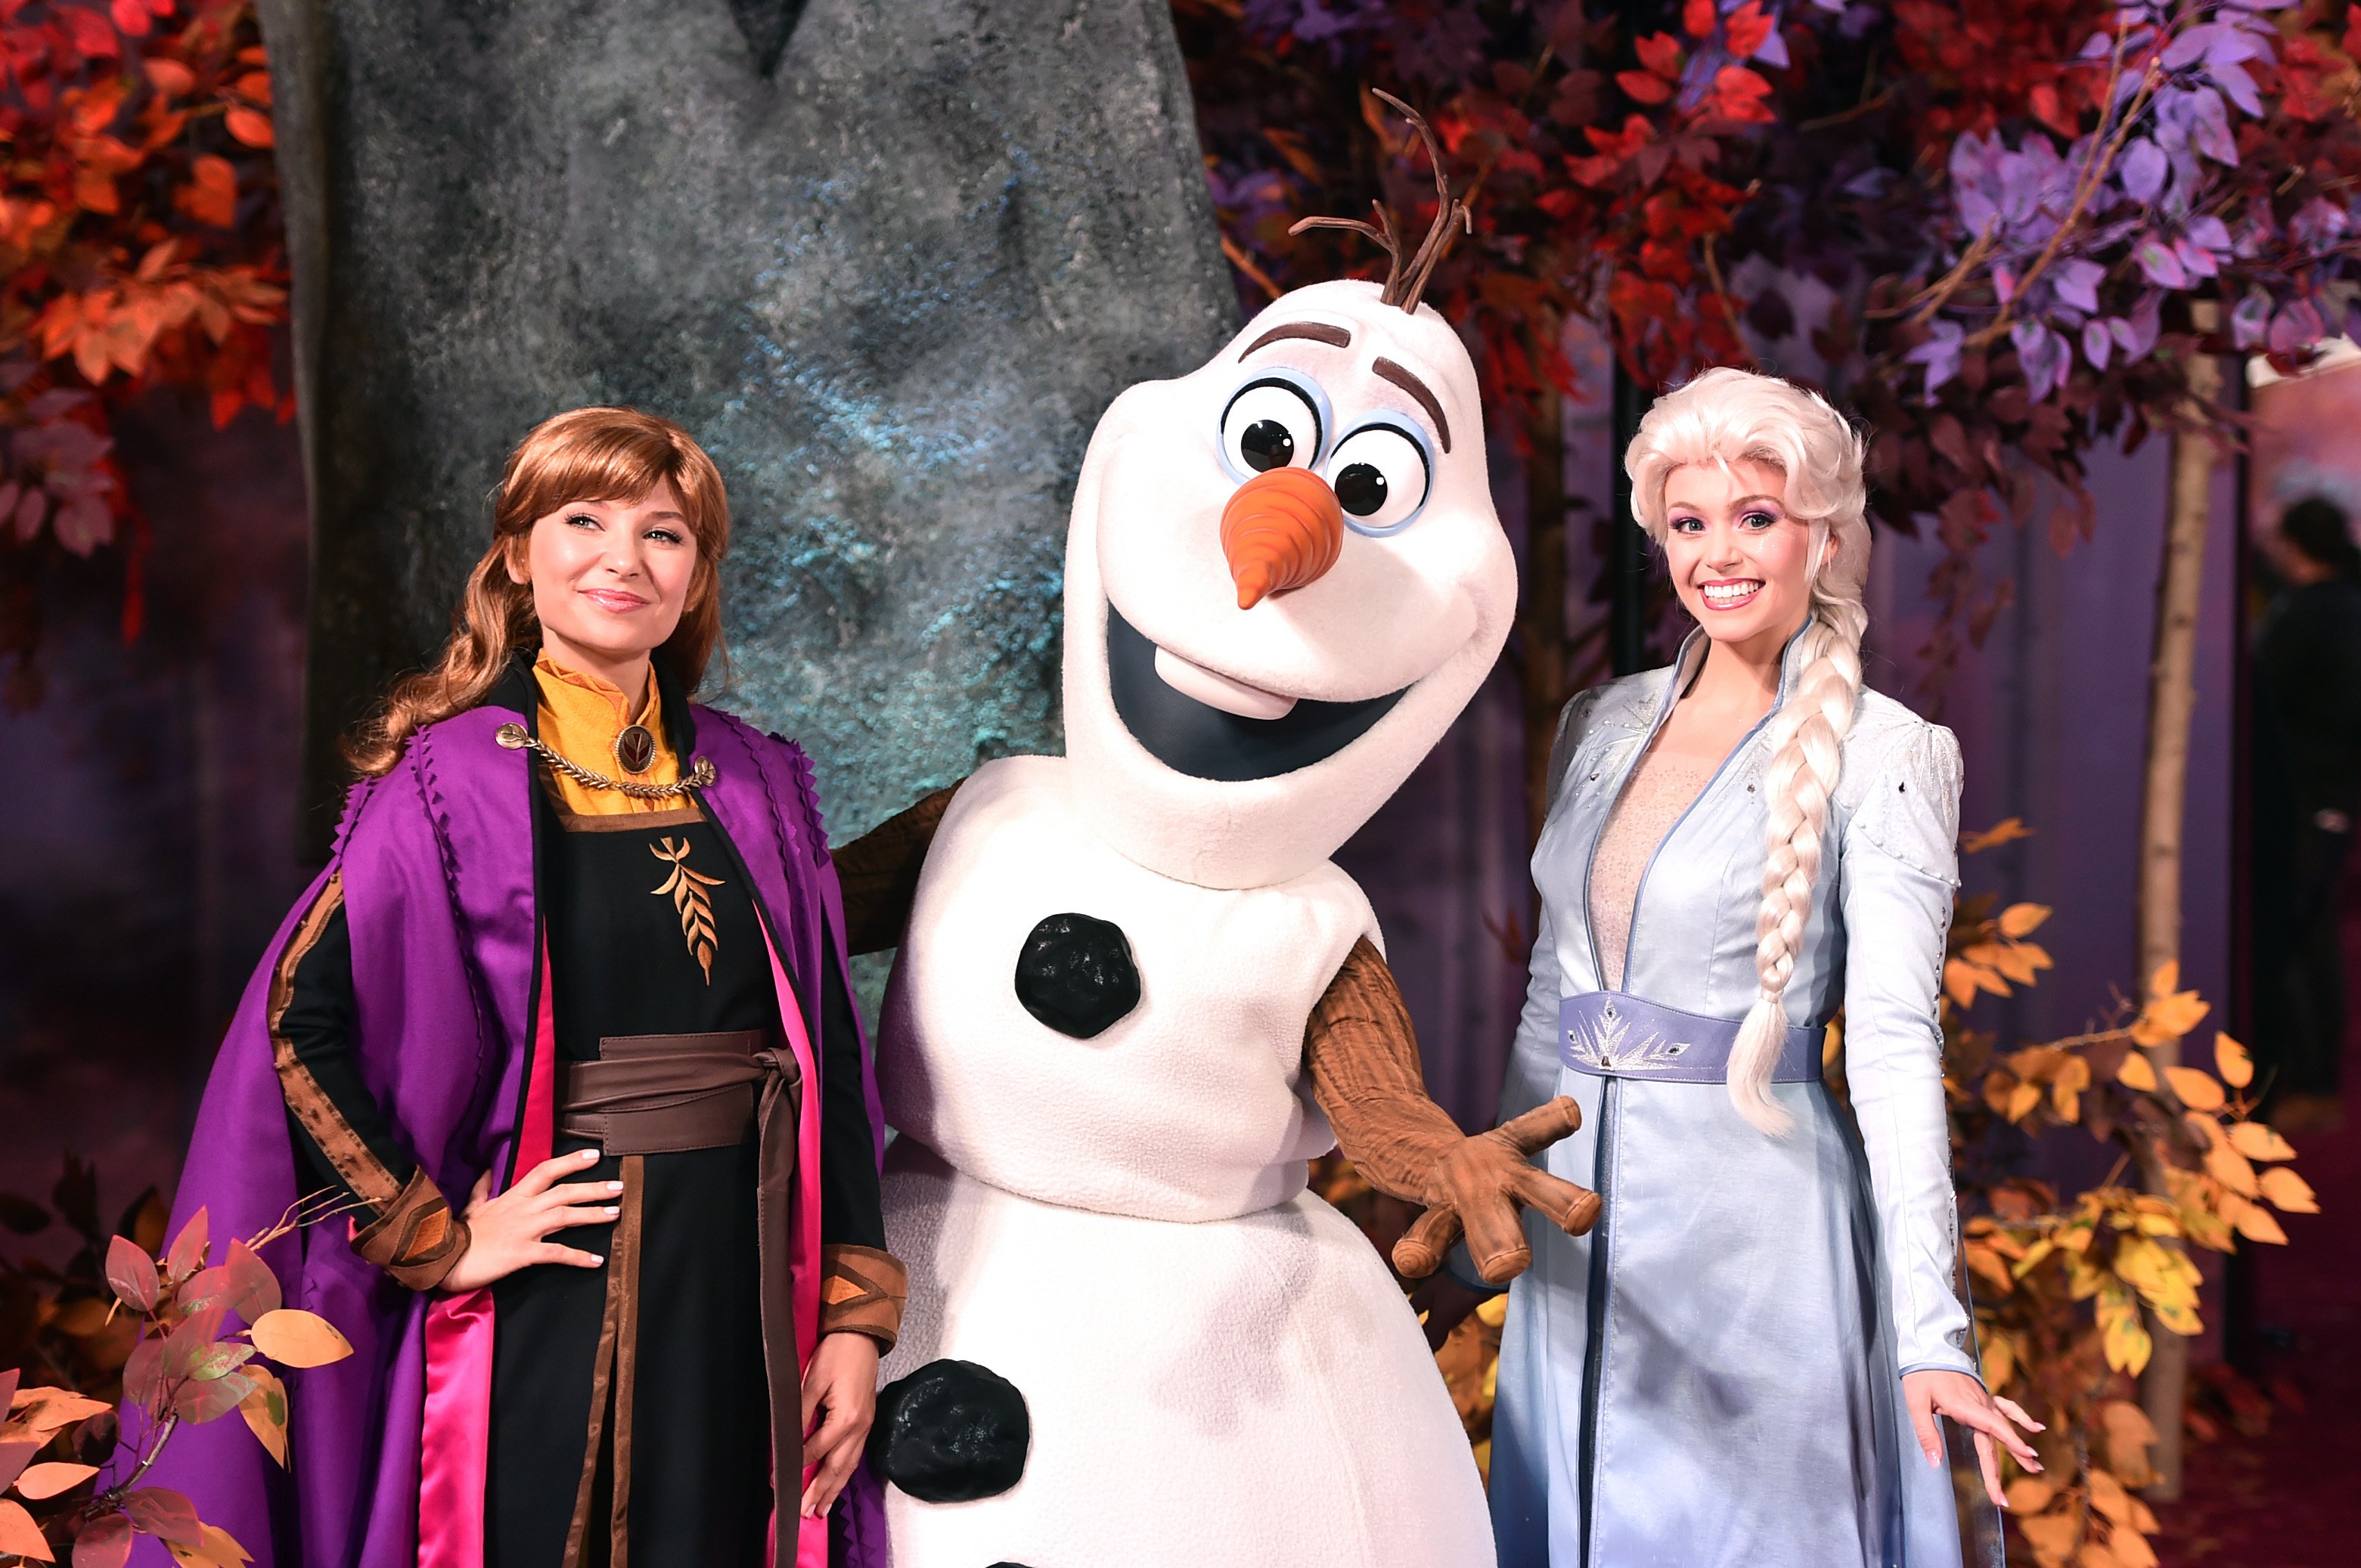 Instructions on how to make the DIY Elsa costume: